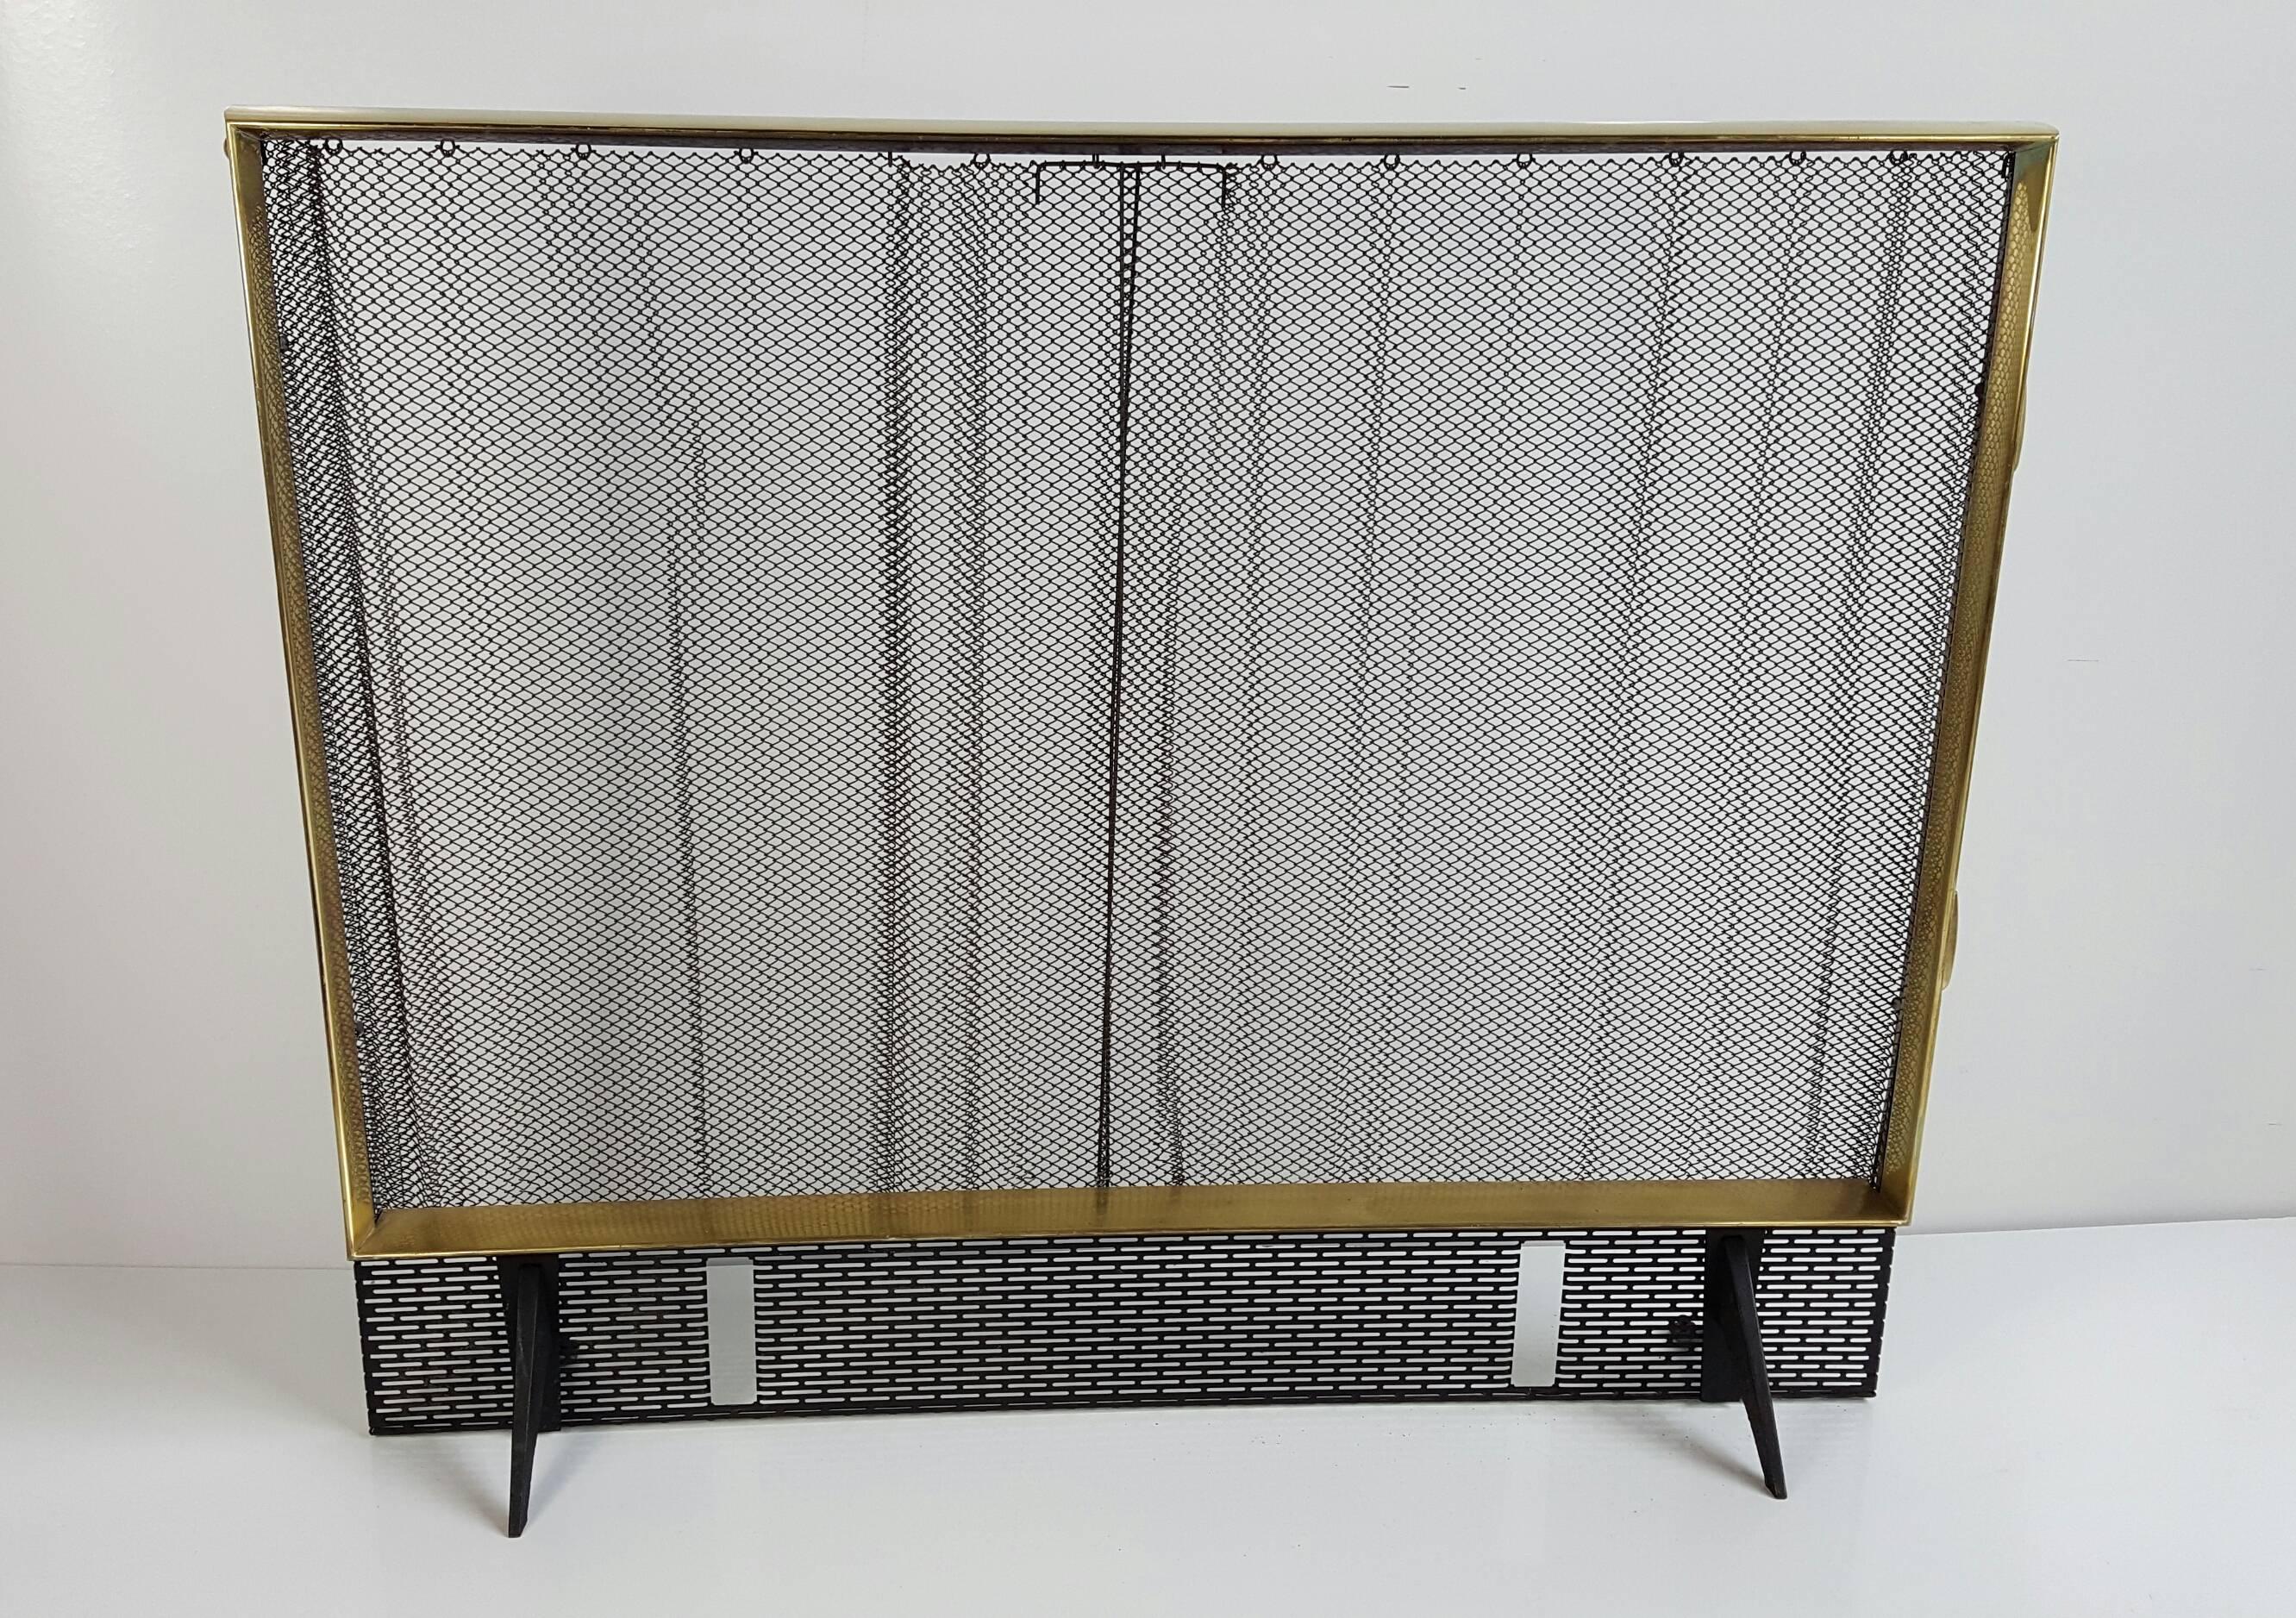 Elegant black iron and polished brass set designed by Donald Deskey for Bennett, includes fire screen, andirons, fire tools and stand. Andirons are signed 